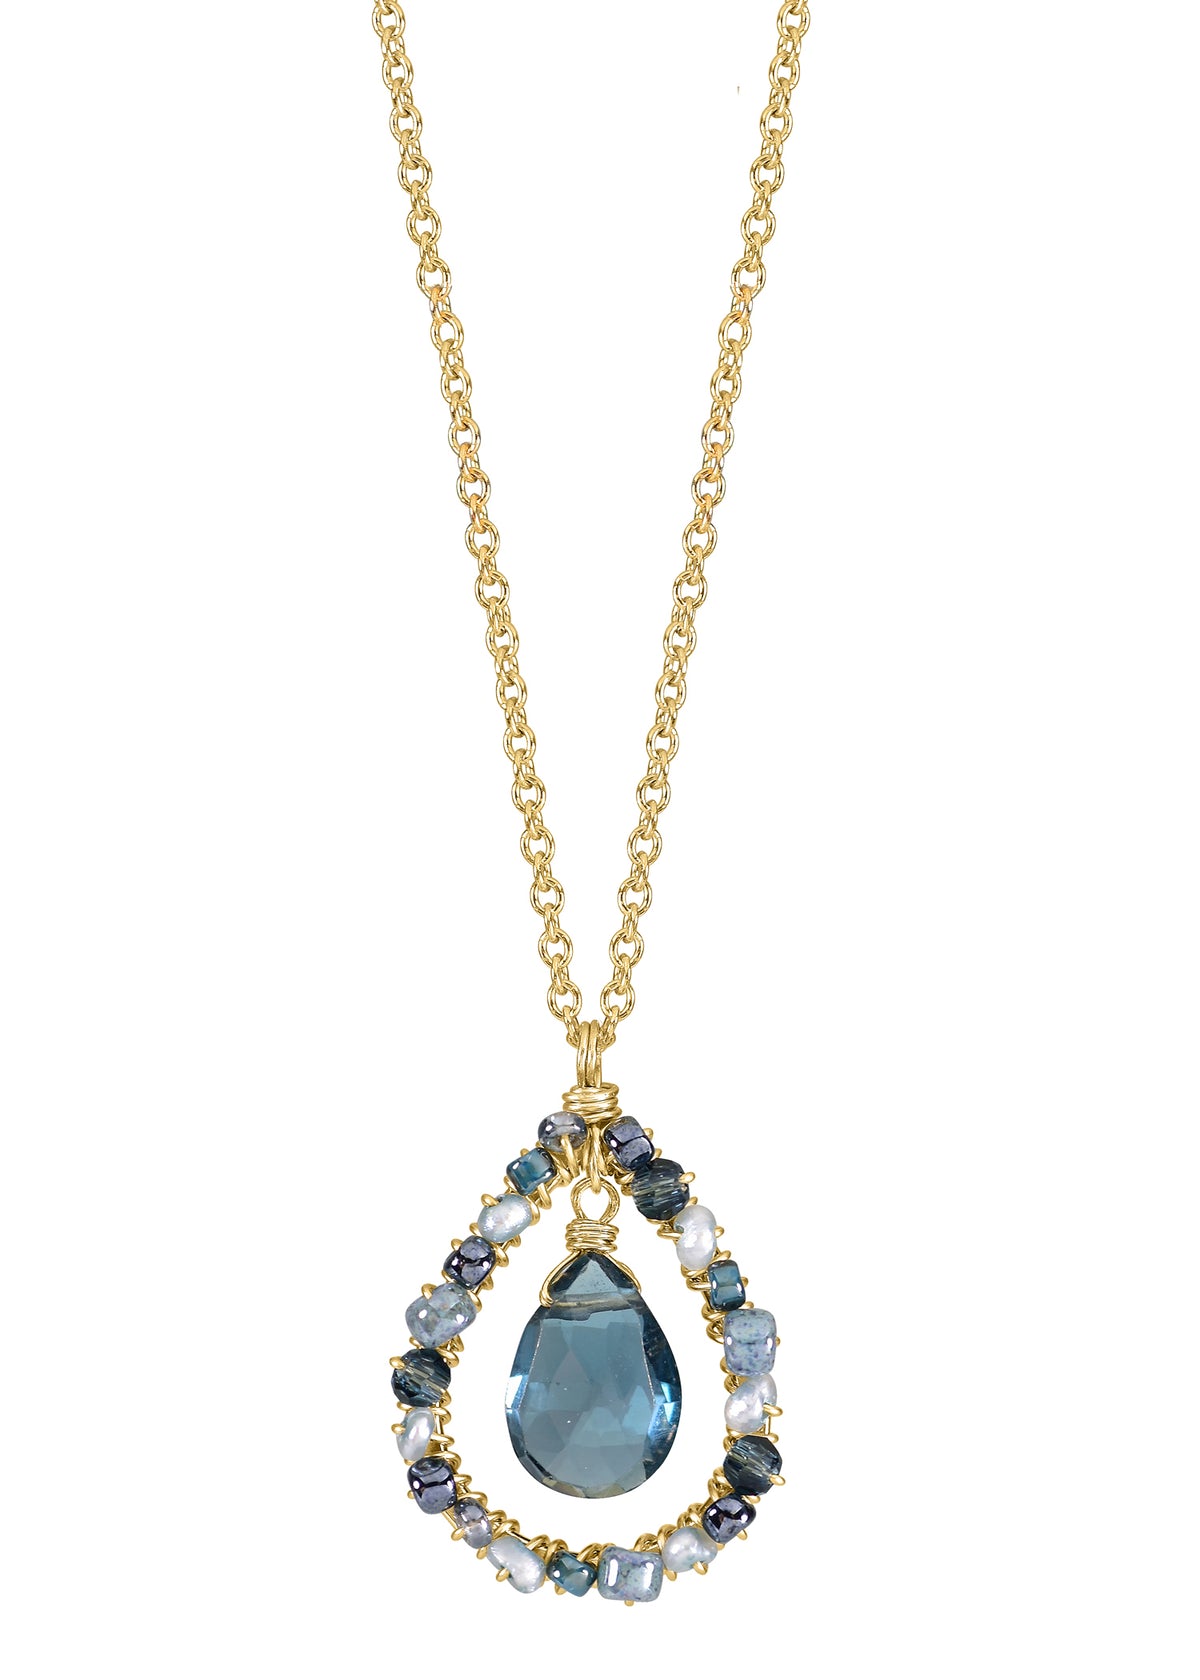 London blue topaz Freshwater pearl Crystal Seed beads 14k gold fill Necklace measures 16&quot; in length Pendant measures 5/8&quot; in length and 1/2&quot; in width at the widest point Handmade in our Los Angeles studio